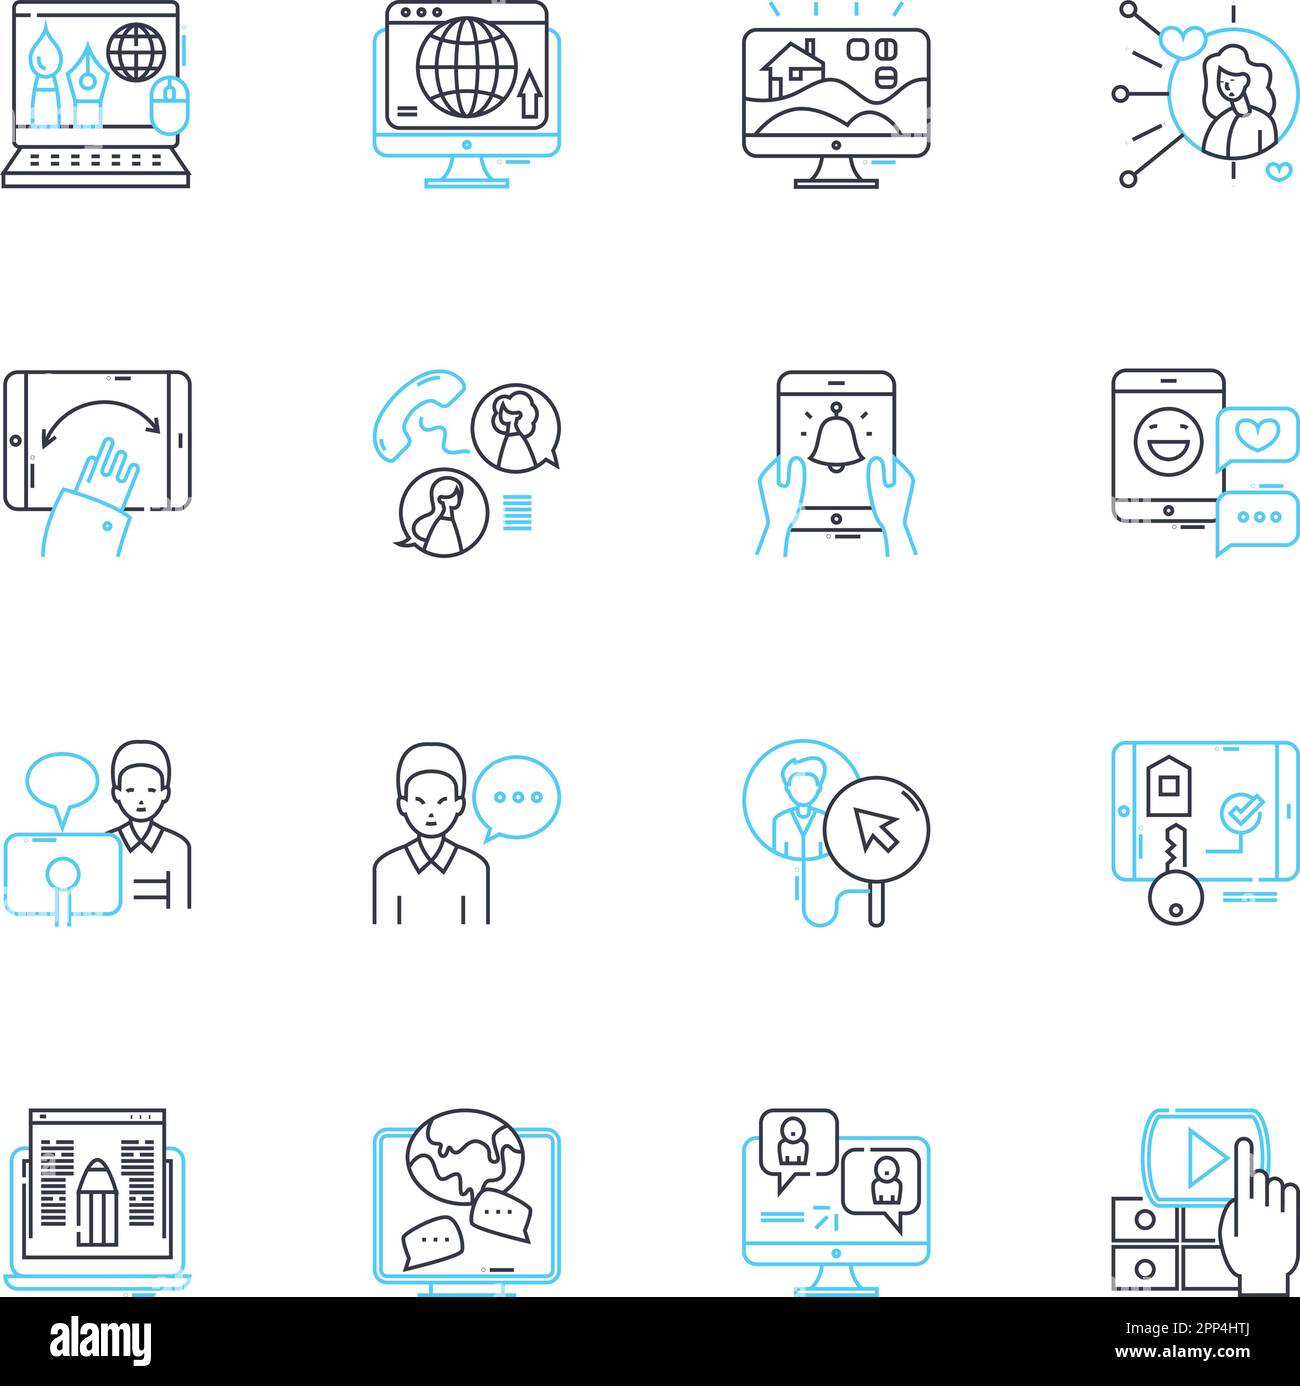 Sales technique linear icons set. Persuasion, Negotiation, Closing, Rapport, Pitching, Confidence, Listening line vector and concept signs. Body Stock Vector